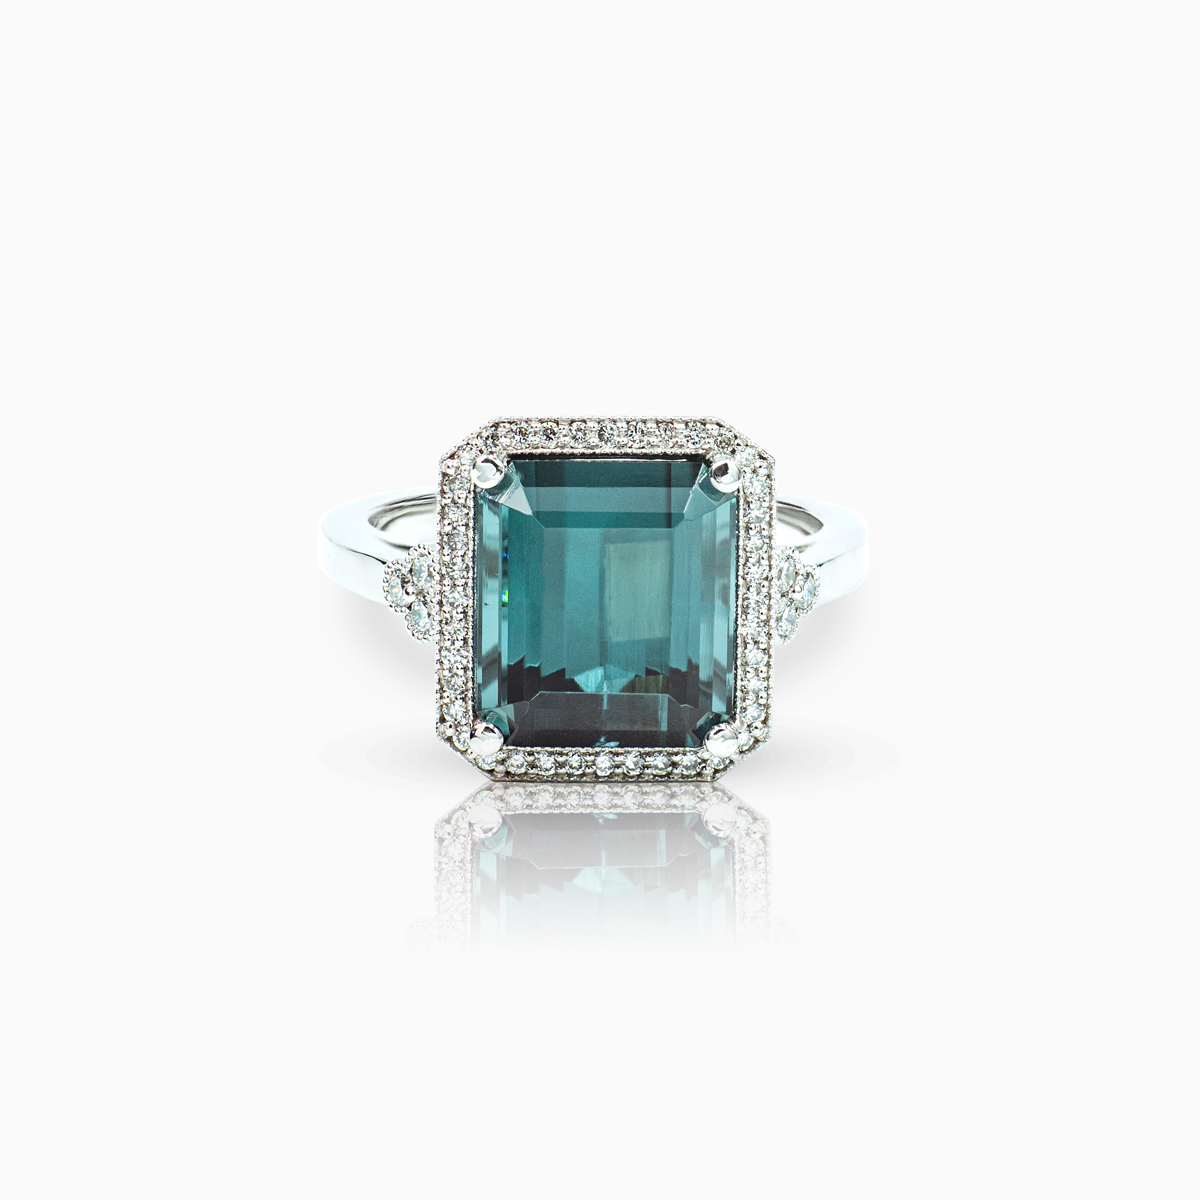 Cathedral Halo Cluster Ring in 18k White Gold with Mined Emerald Shaped Teal Blue-Green Tourmaline and Colorless Diamonds